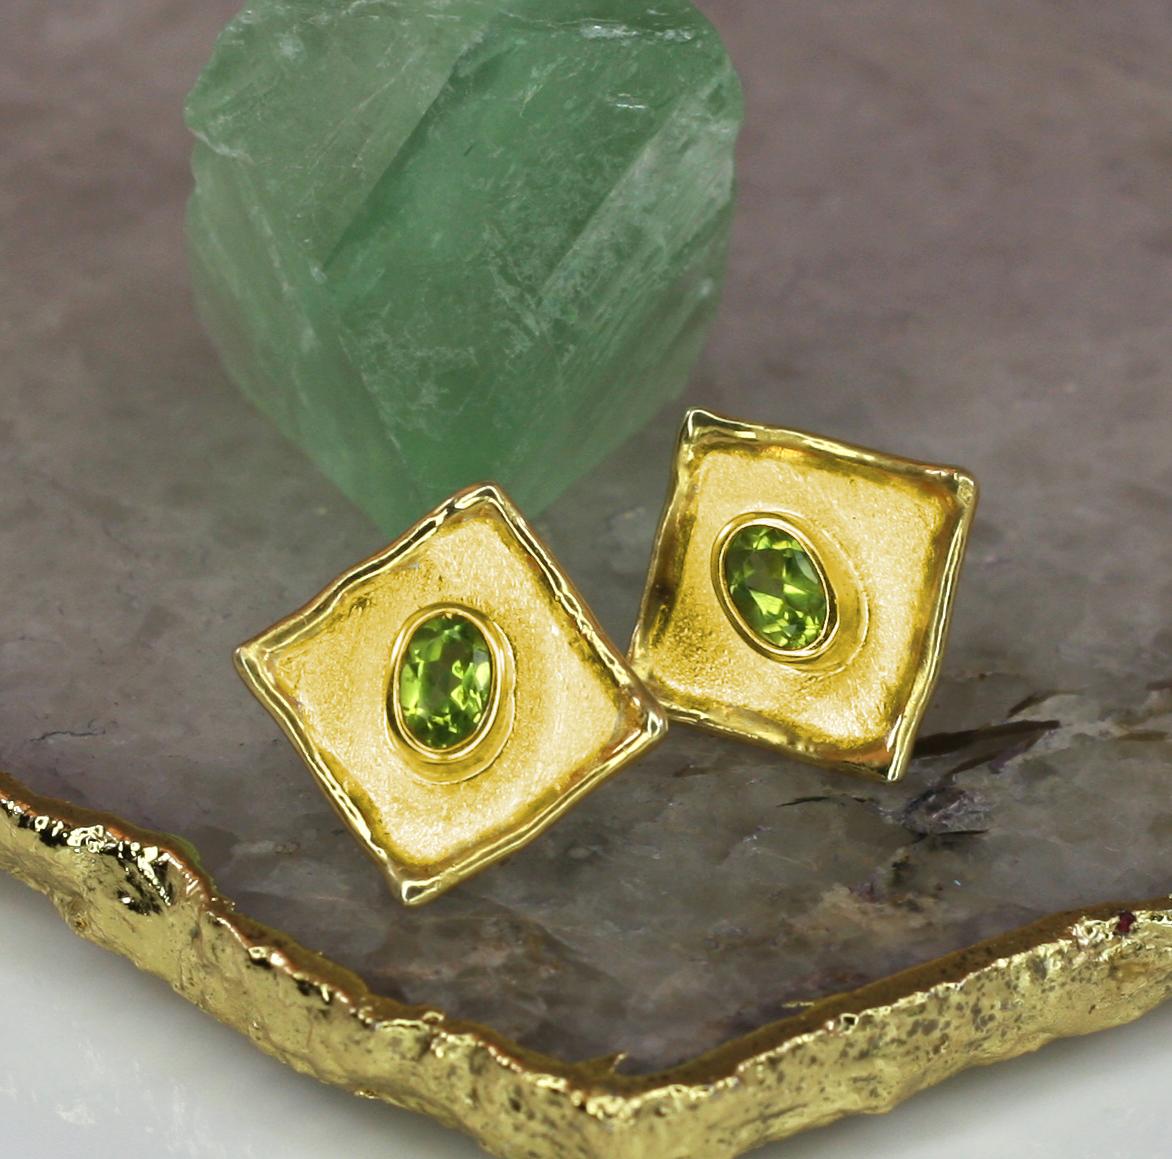 Yianni Creations Earrings are 100% Handmade from 18 Karat Yellow Gold. Each stunning earring features each 0.50 Carat Oval Cut Peridot. The unique look is created by the brushed texture and nature-inspired liquid edges. 
Contact us for this design